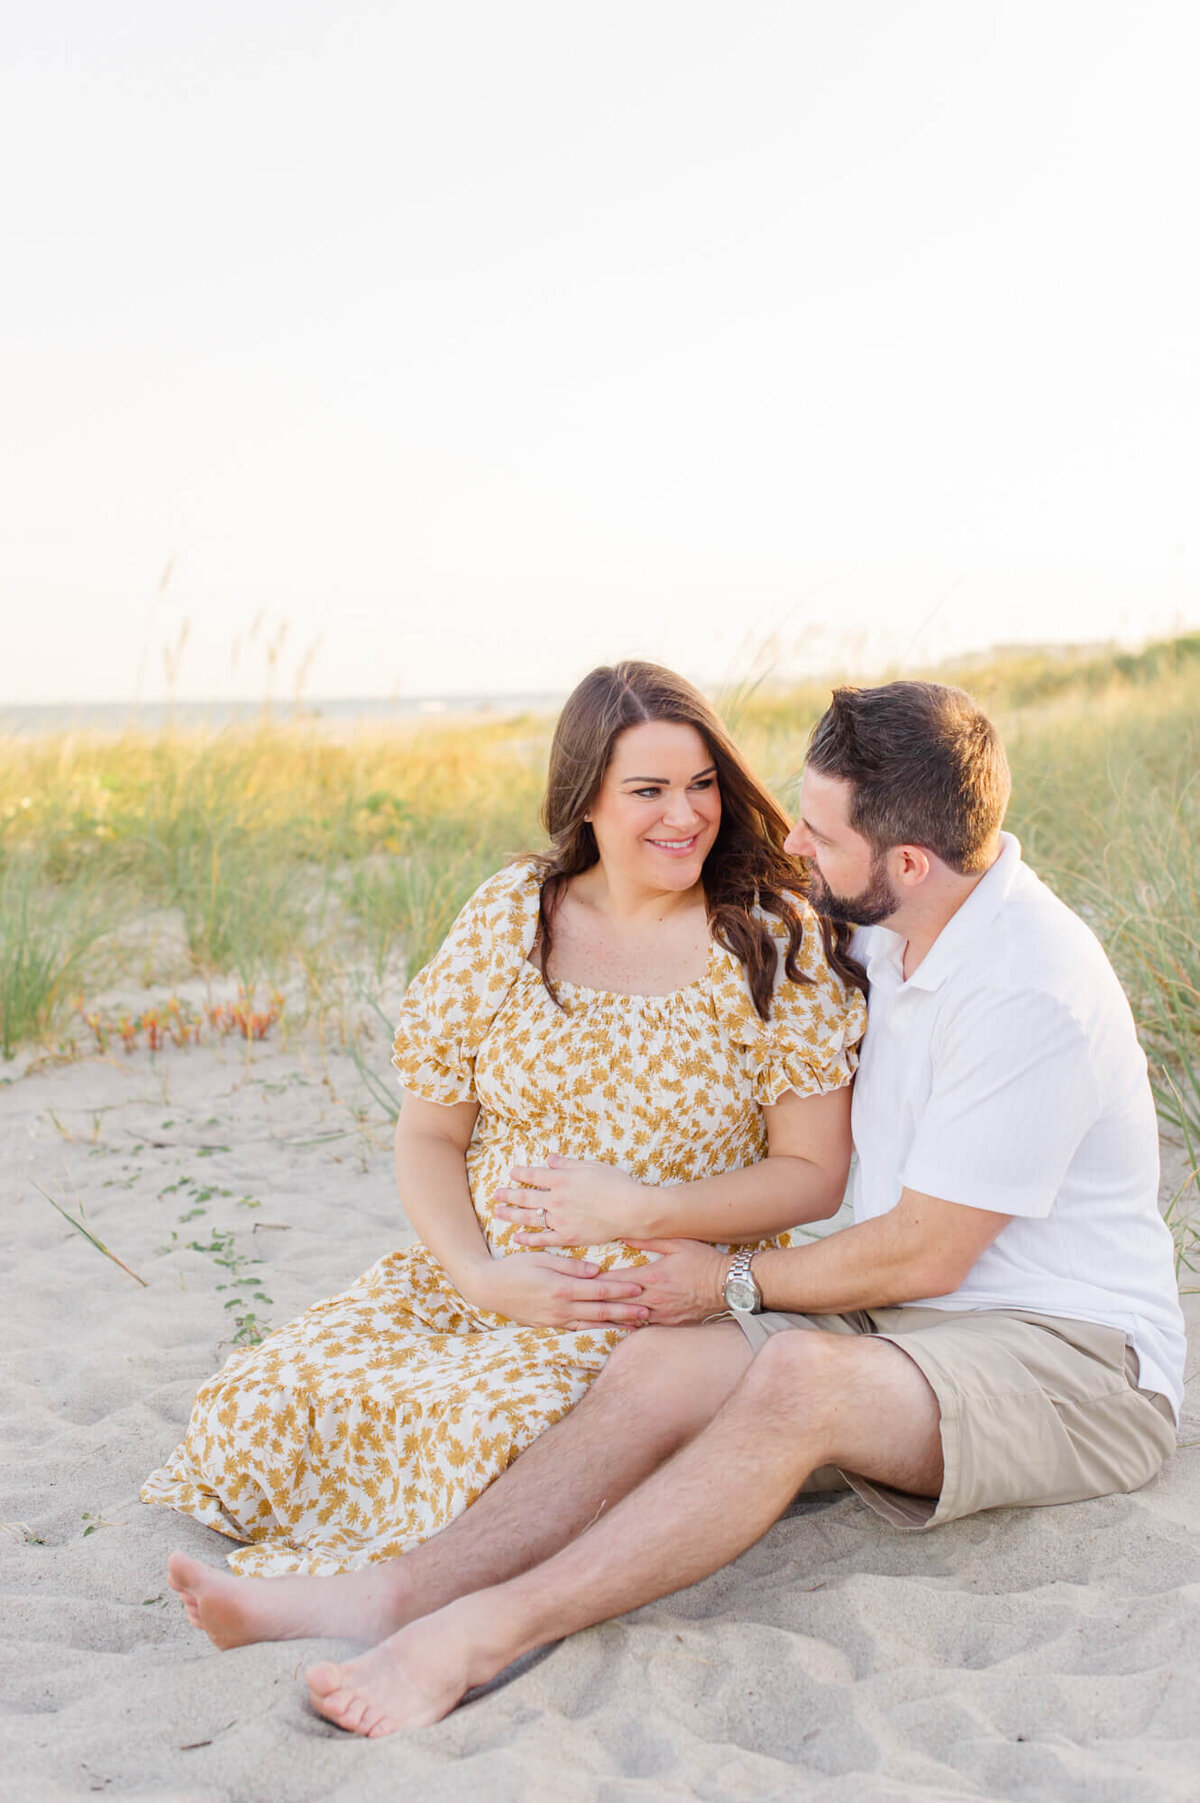 Expectant parents sit in the dunes at sunset holding mothers pregnant belly at golden hour